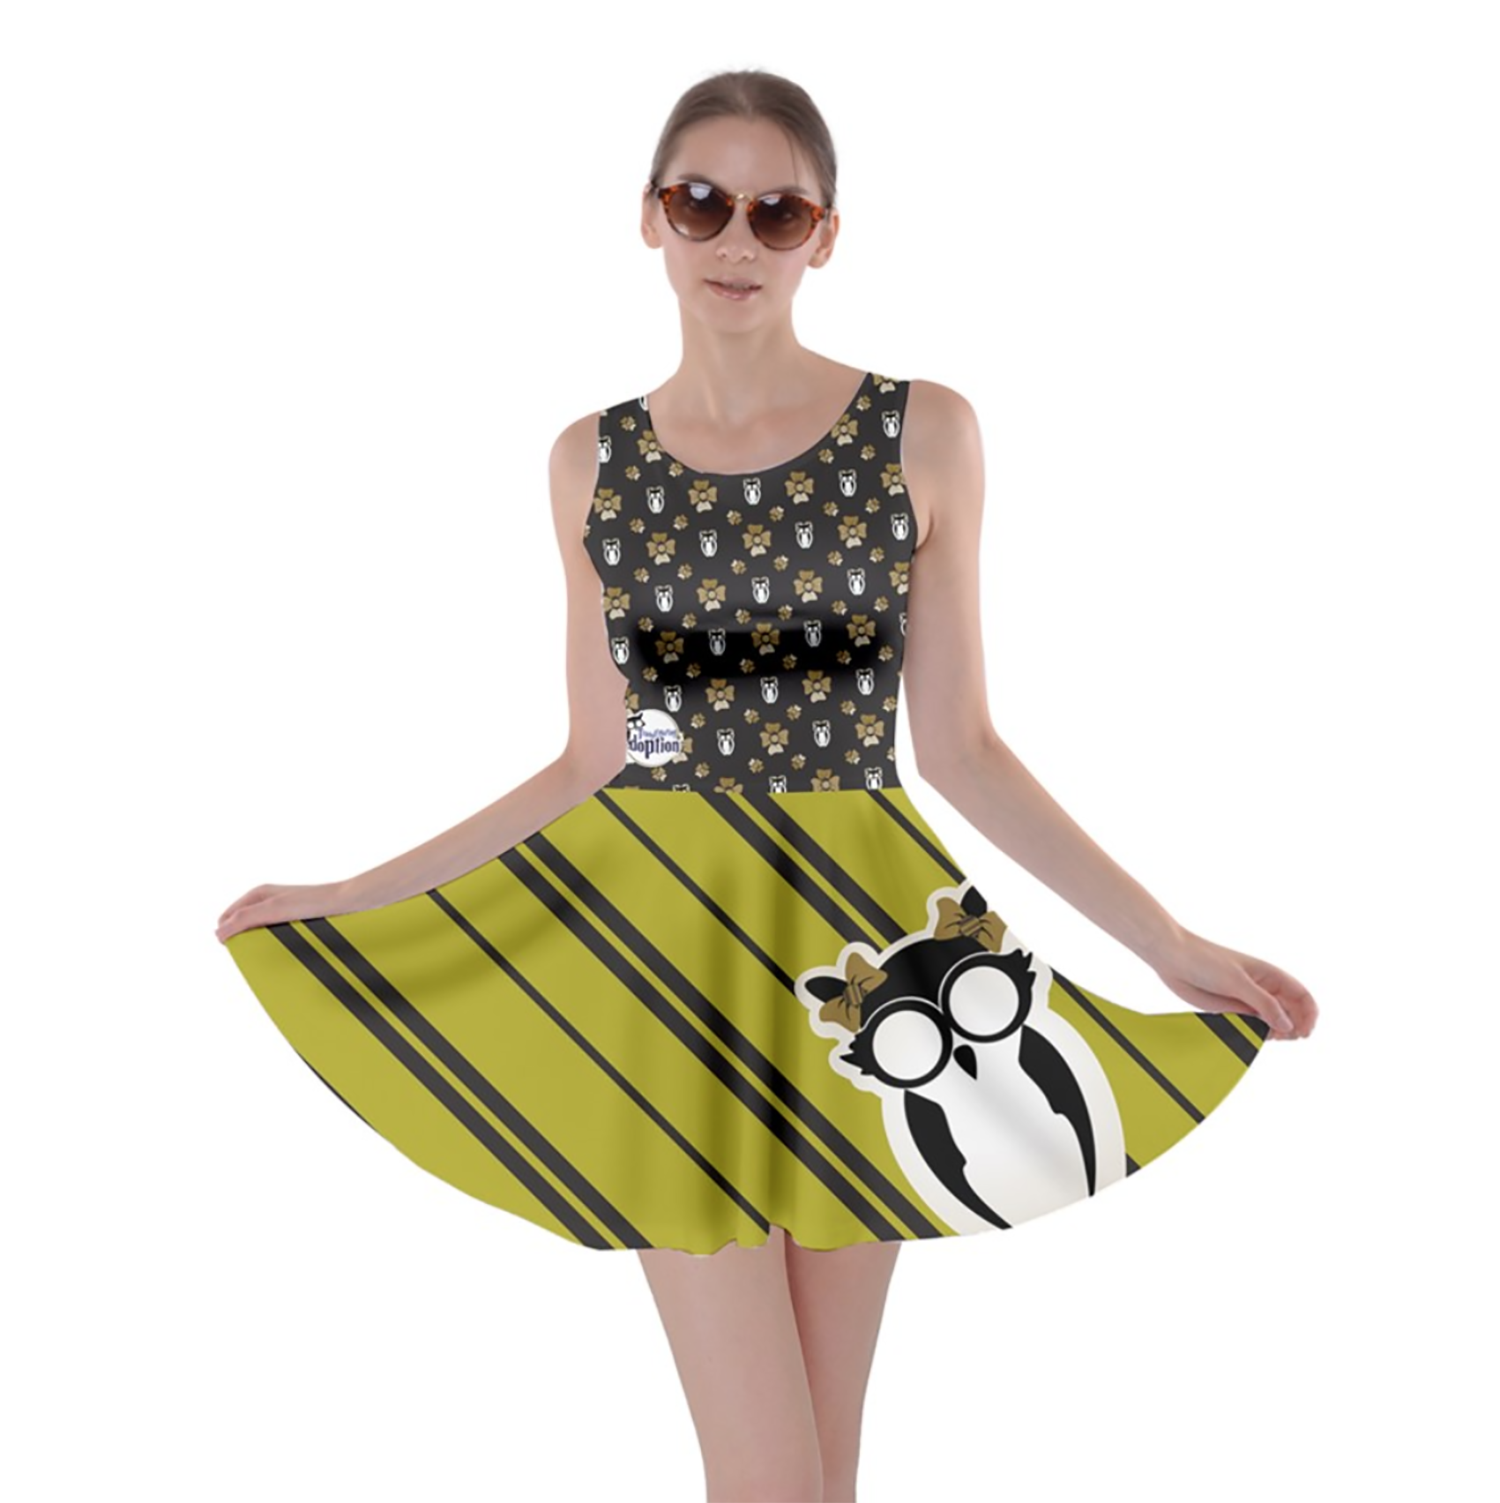 Owl (Yellow) Striped Skater Dress - Inspired by Hufflepuff